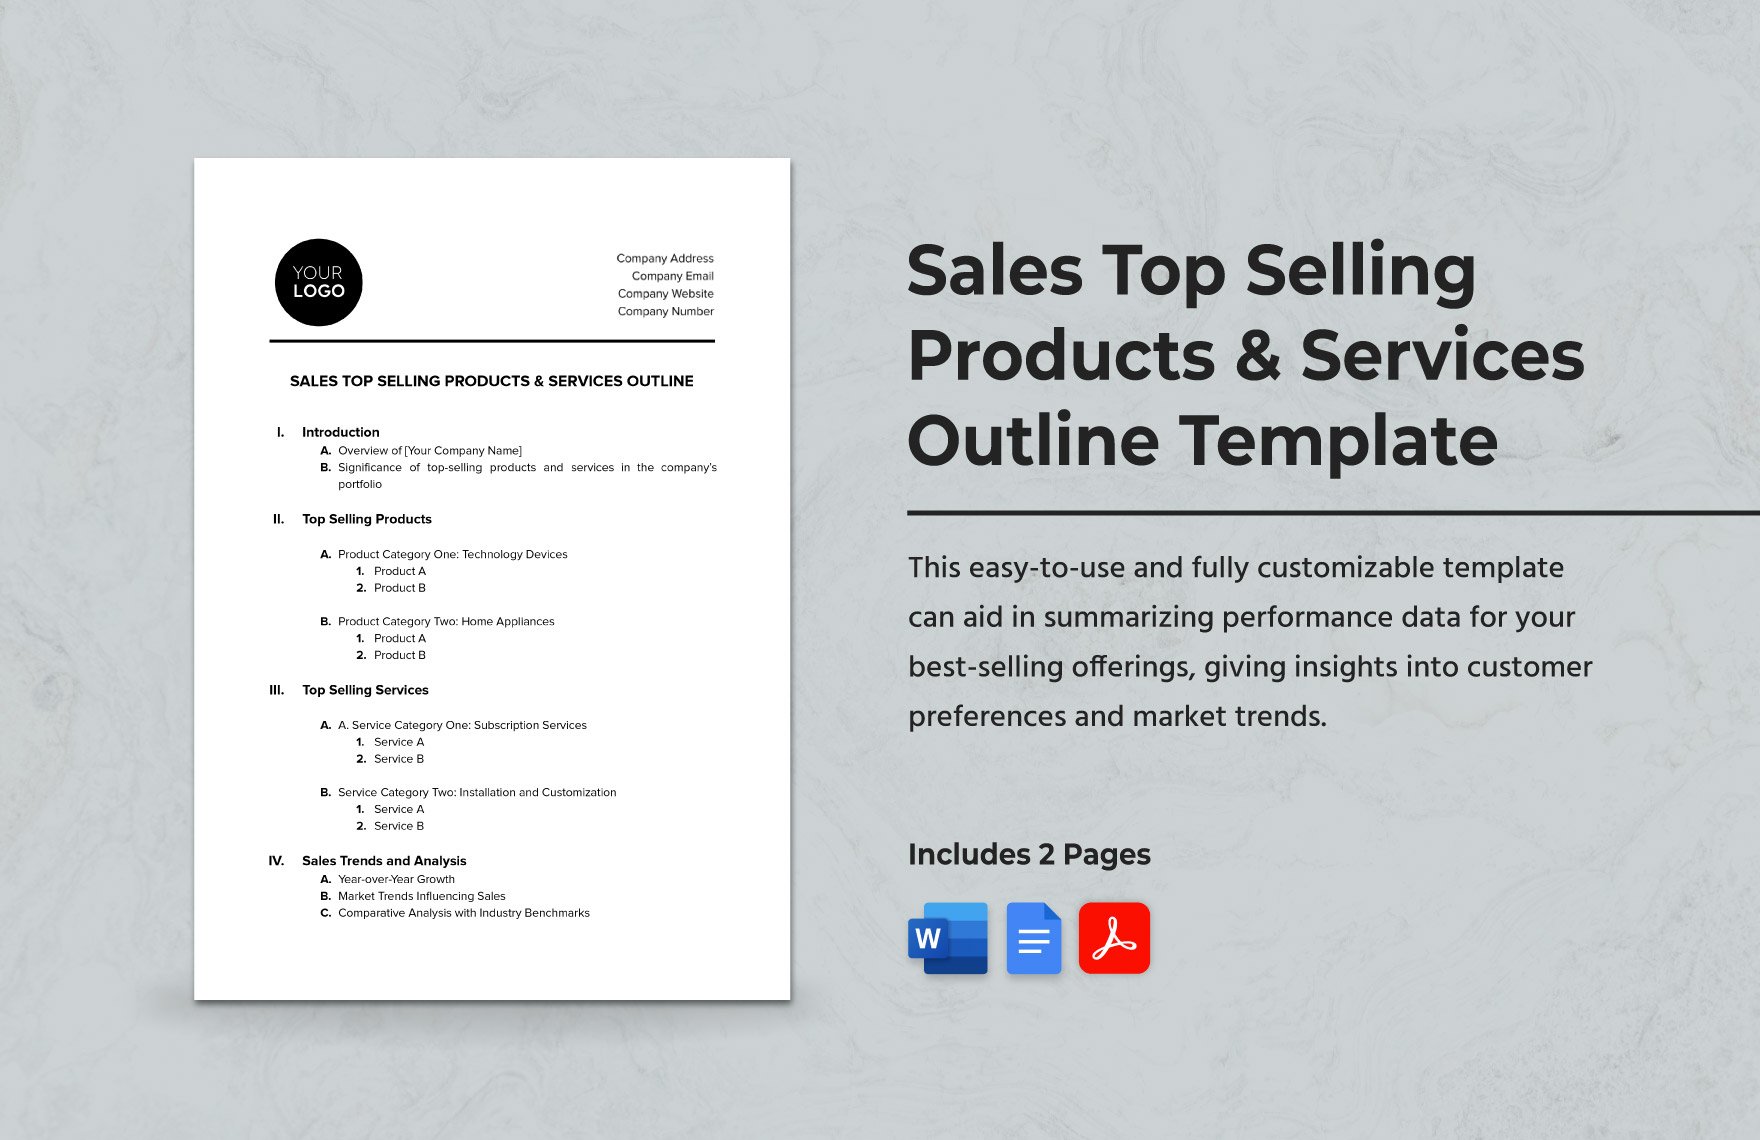 Sales Top Selling Products & Services Outline Template in Word, Google Docs, PDF